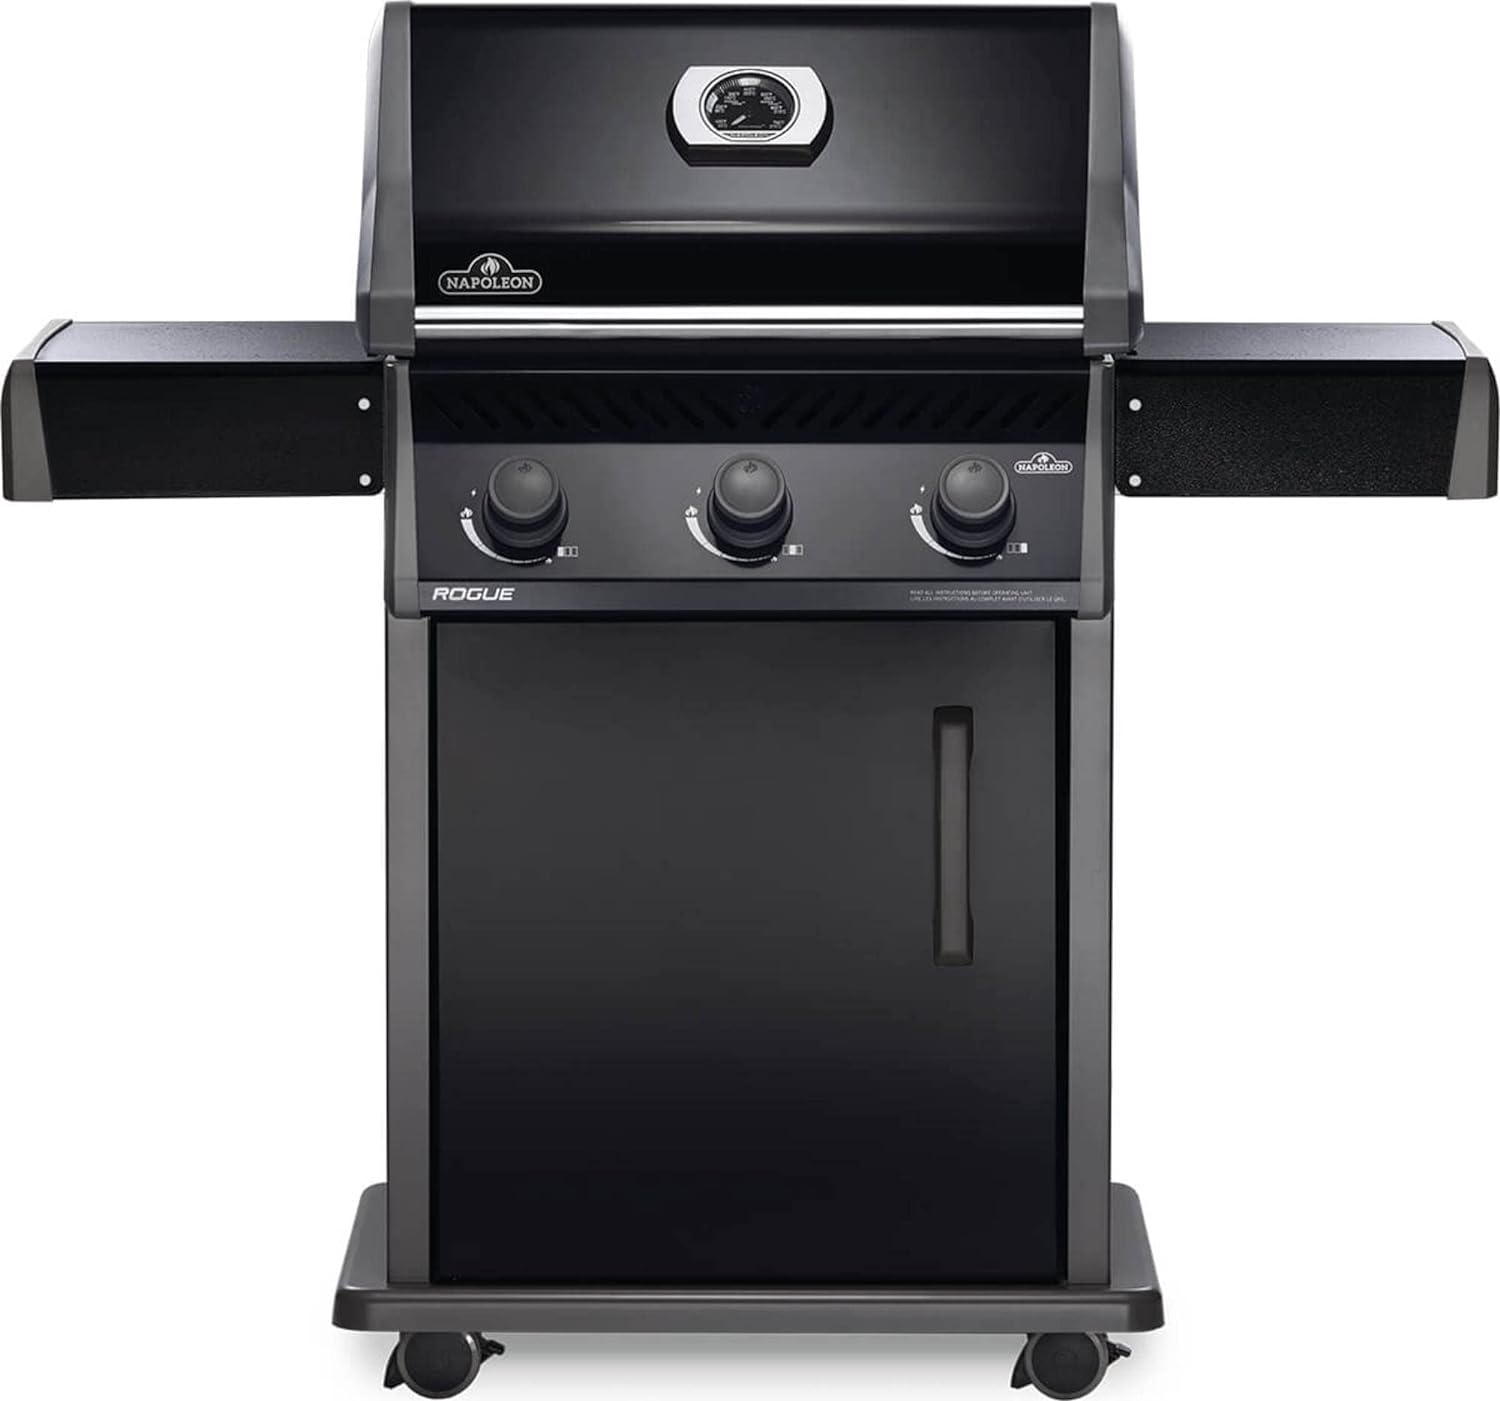 Napoleon Rogue 425 BBQ Grill, Black, Propane Gas - R425PK-1 With Three Burners, Barbecue Gas Cart, Folding Side shelves, Instant Failsafe Ignition